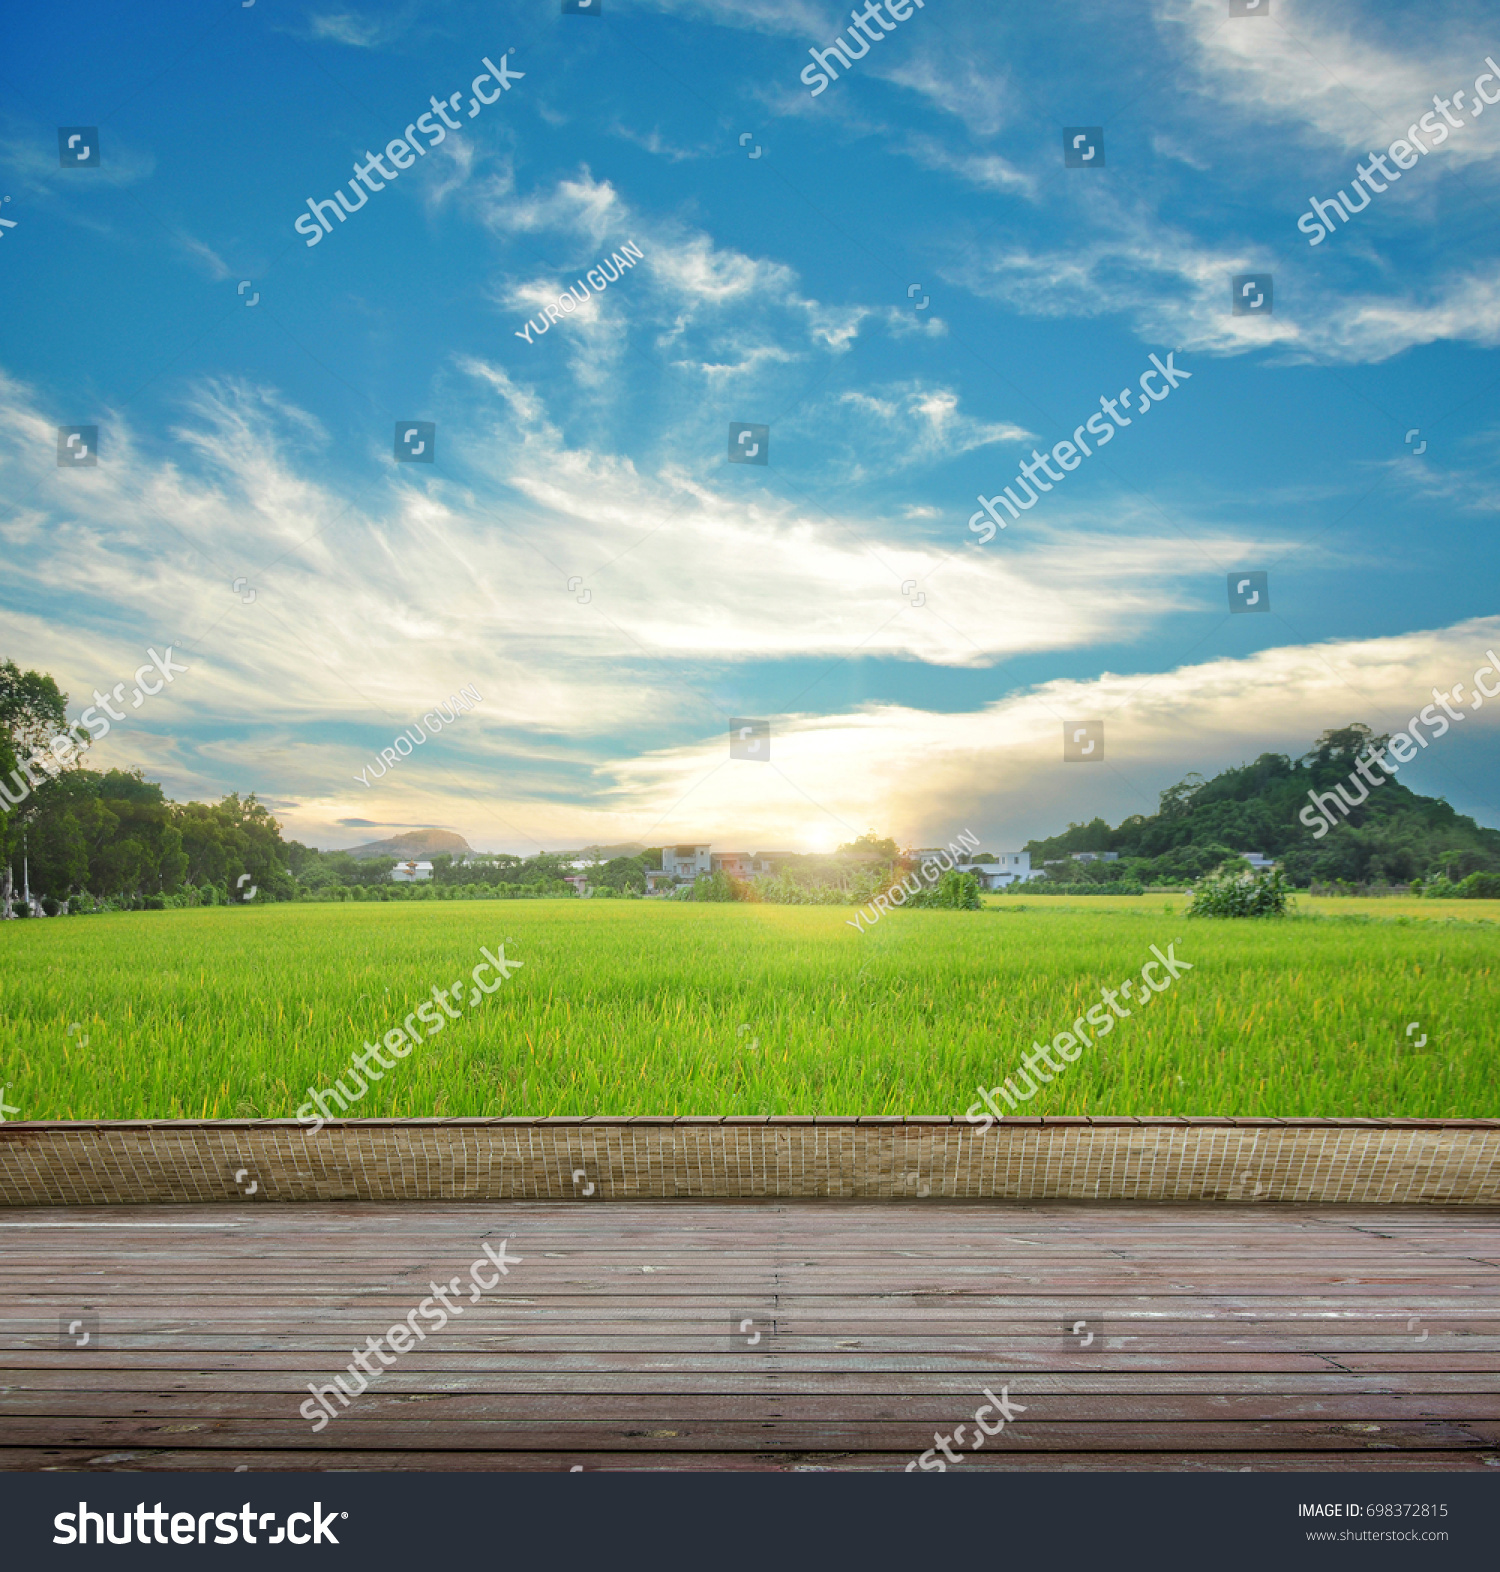 Synthesis of wooden planks floor and green field background. Green field under the sun. Wooden planks floor. Beauty nature background. #698372815